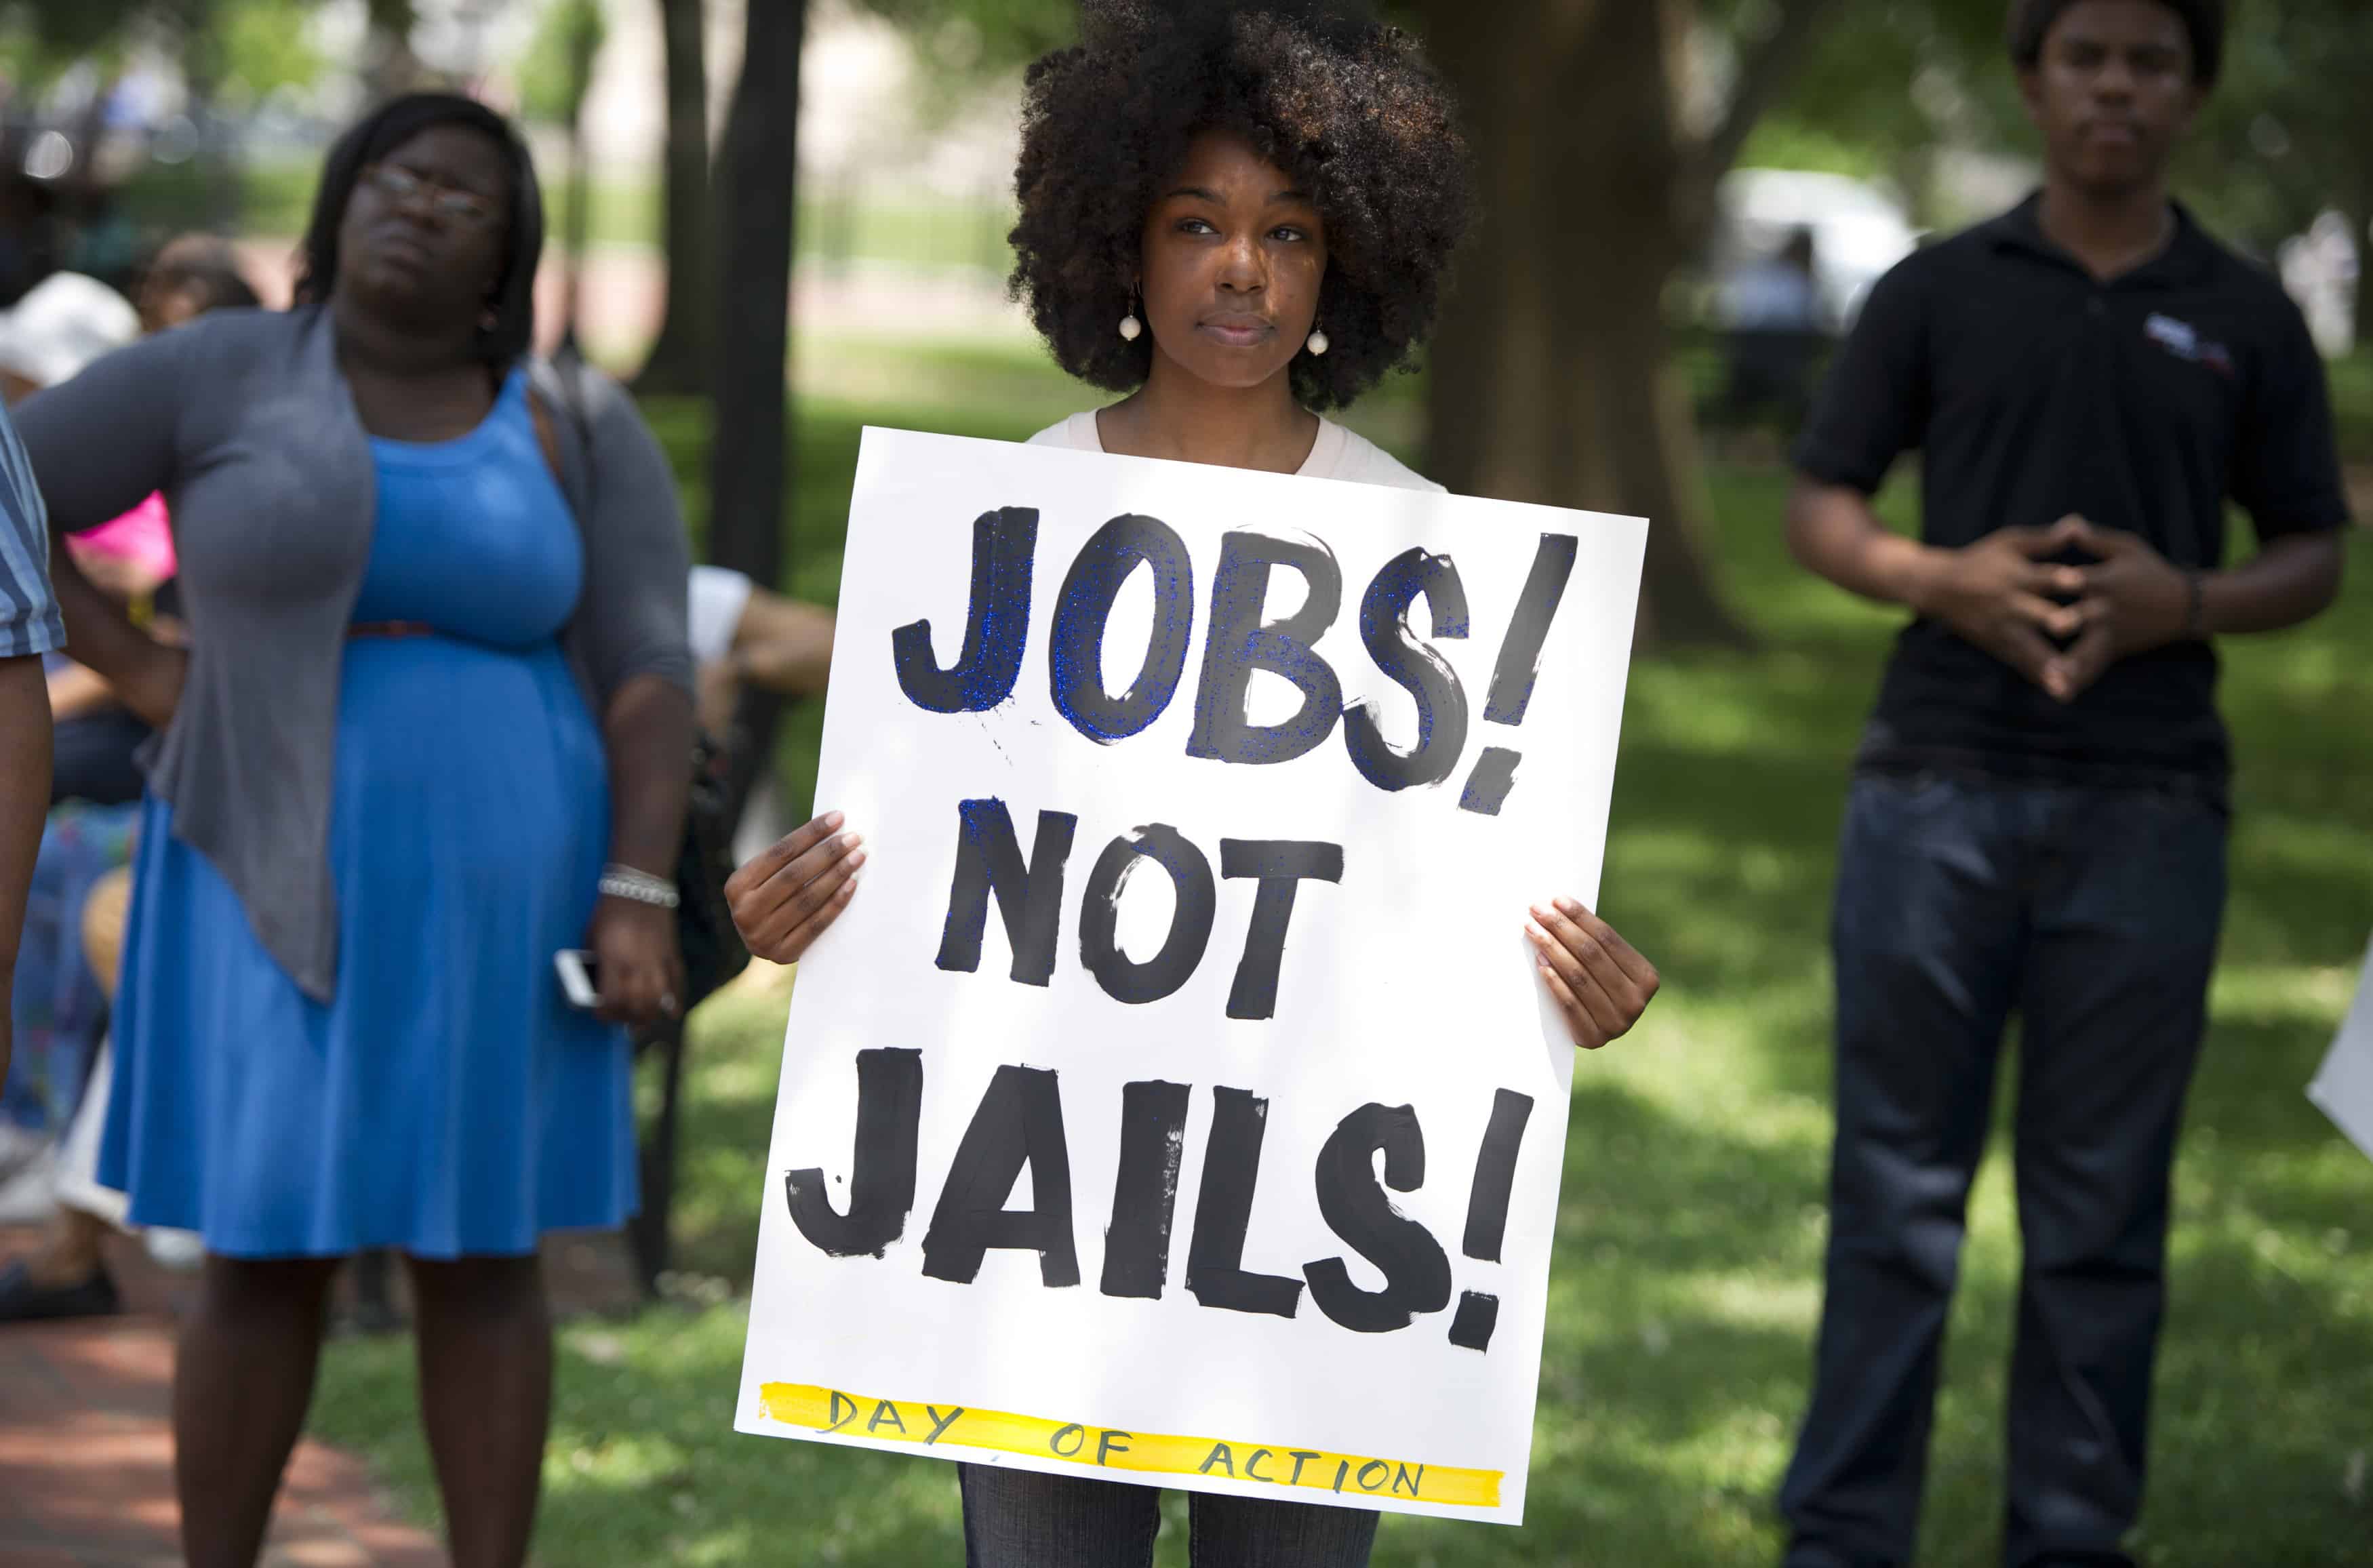 Jobs not jails: Protesters call for drug legalization in Washington, D.C.